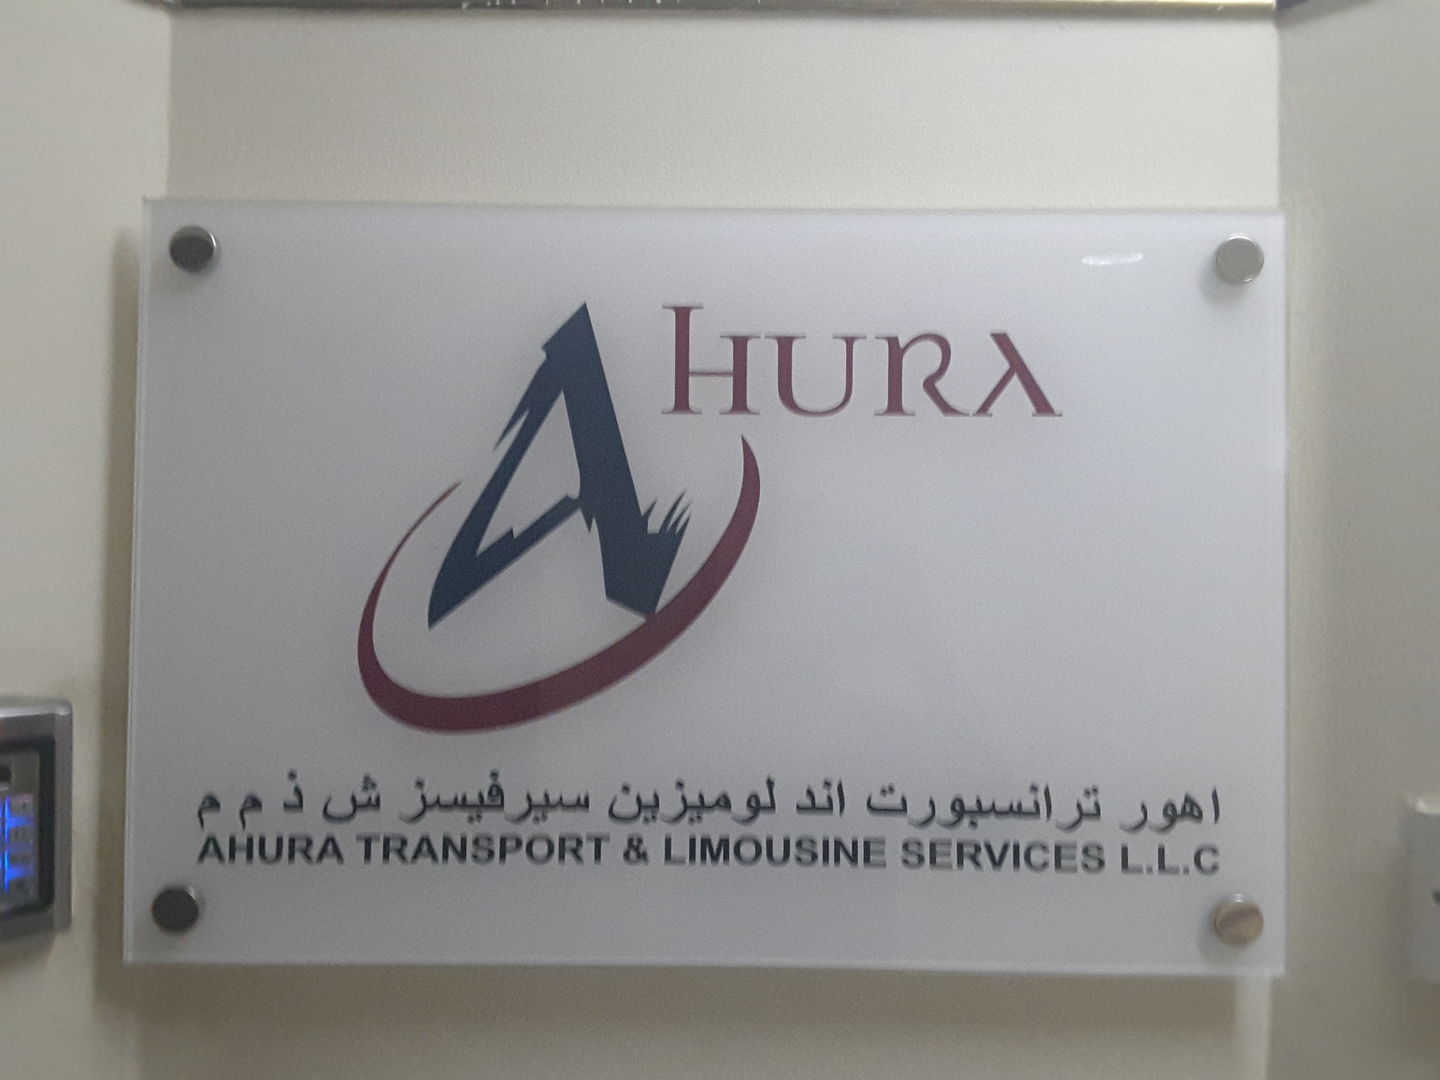 Ahura Transport and Limousine Services LLC